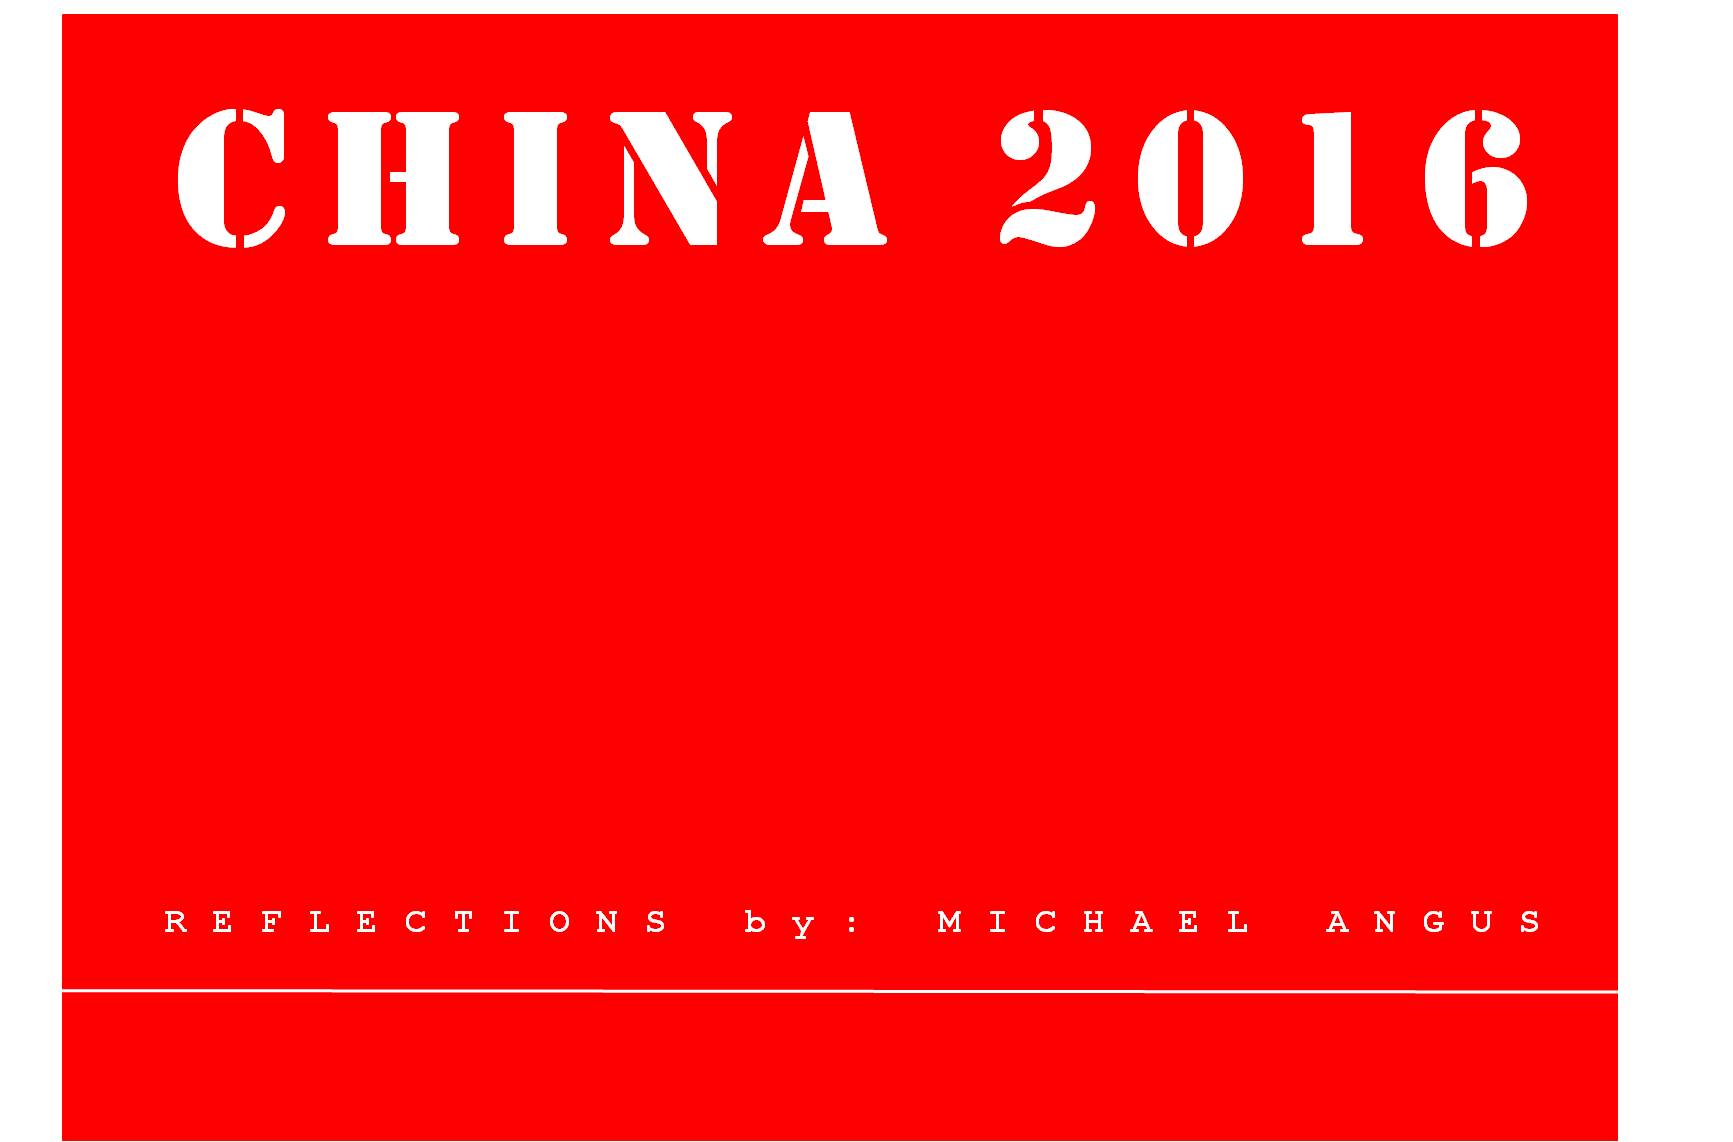 China 2016 Book Cover